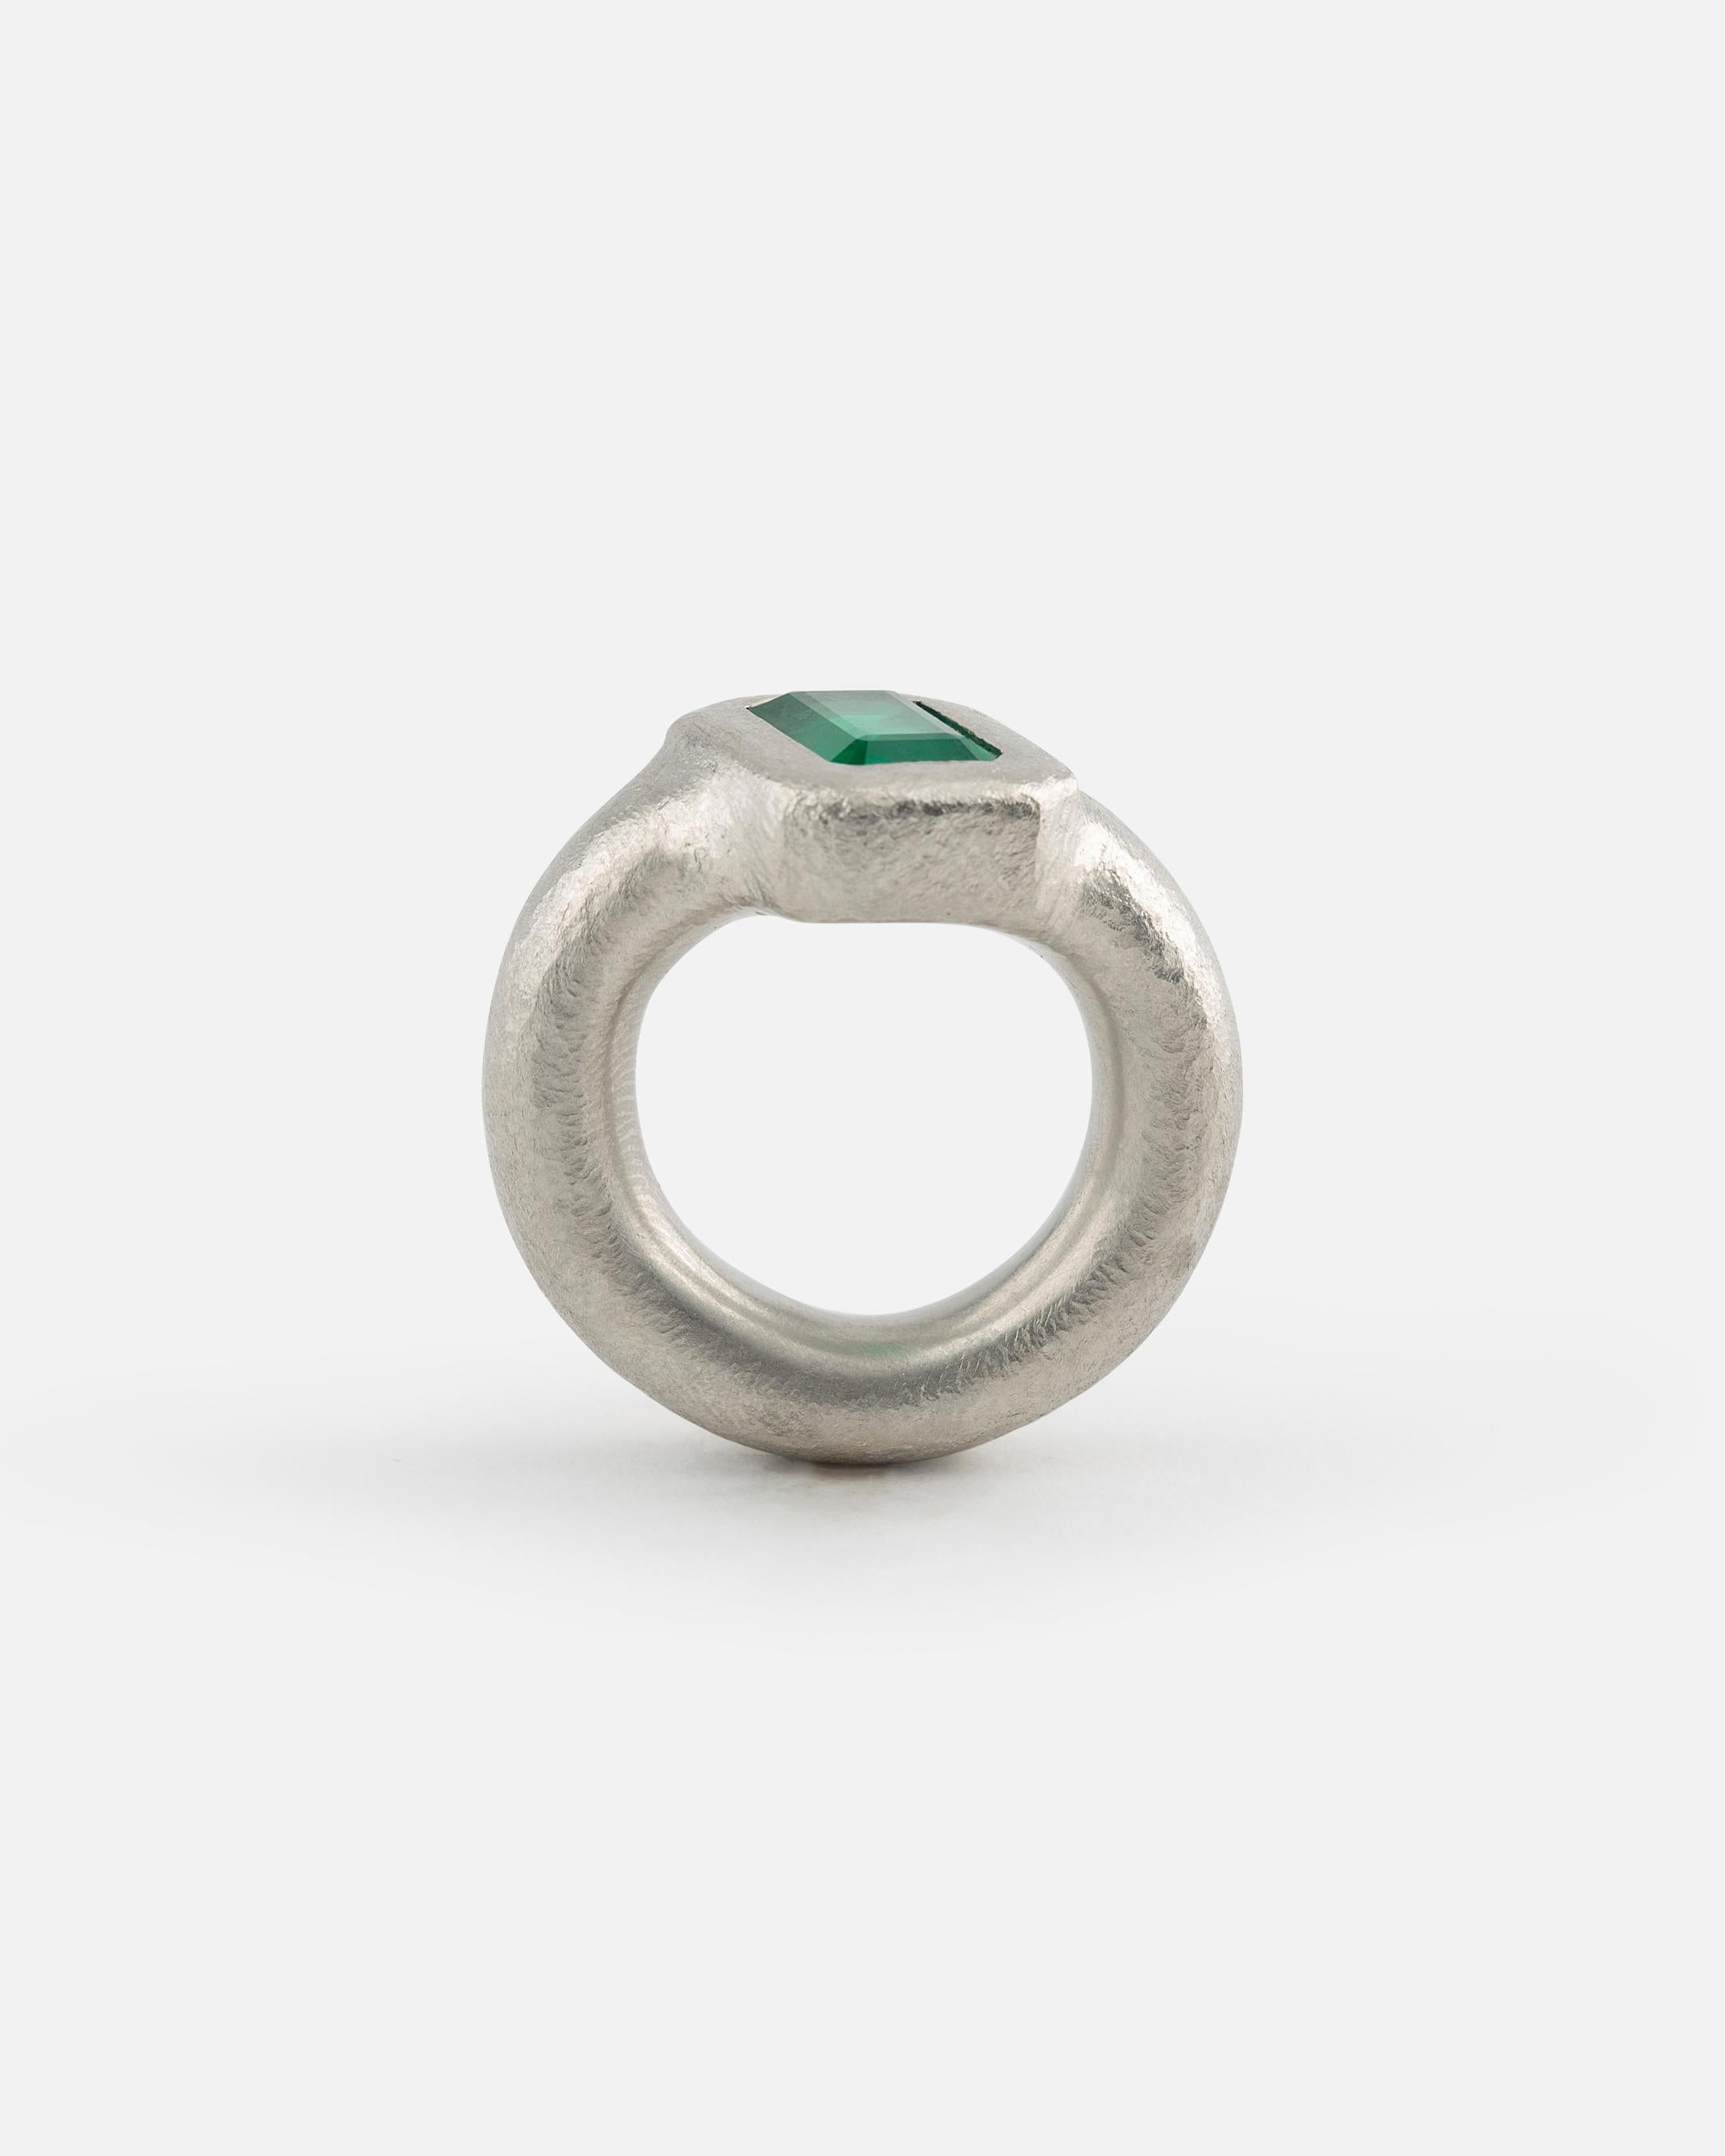 This ring is made of solid platinum and has a big emerald (3.95 ct) in the middle, which is sitting oblique. The surface is hammered matt. Made by Lisa Scherebnenko, a contemporary german jewellery artist.